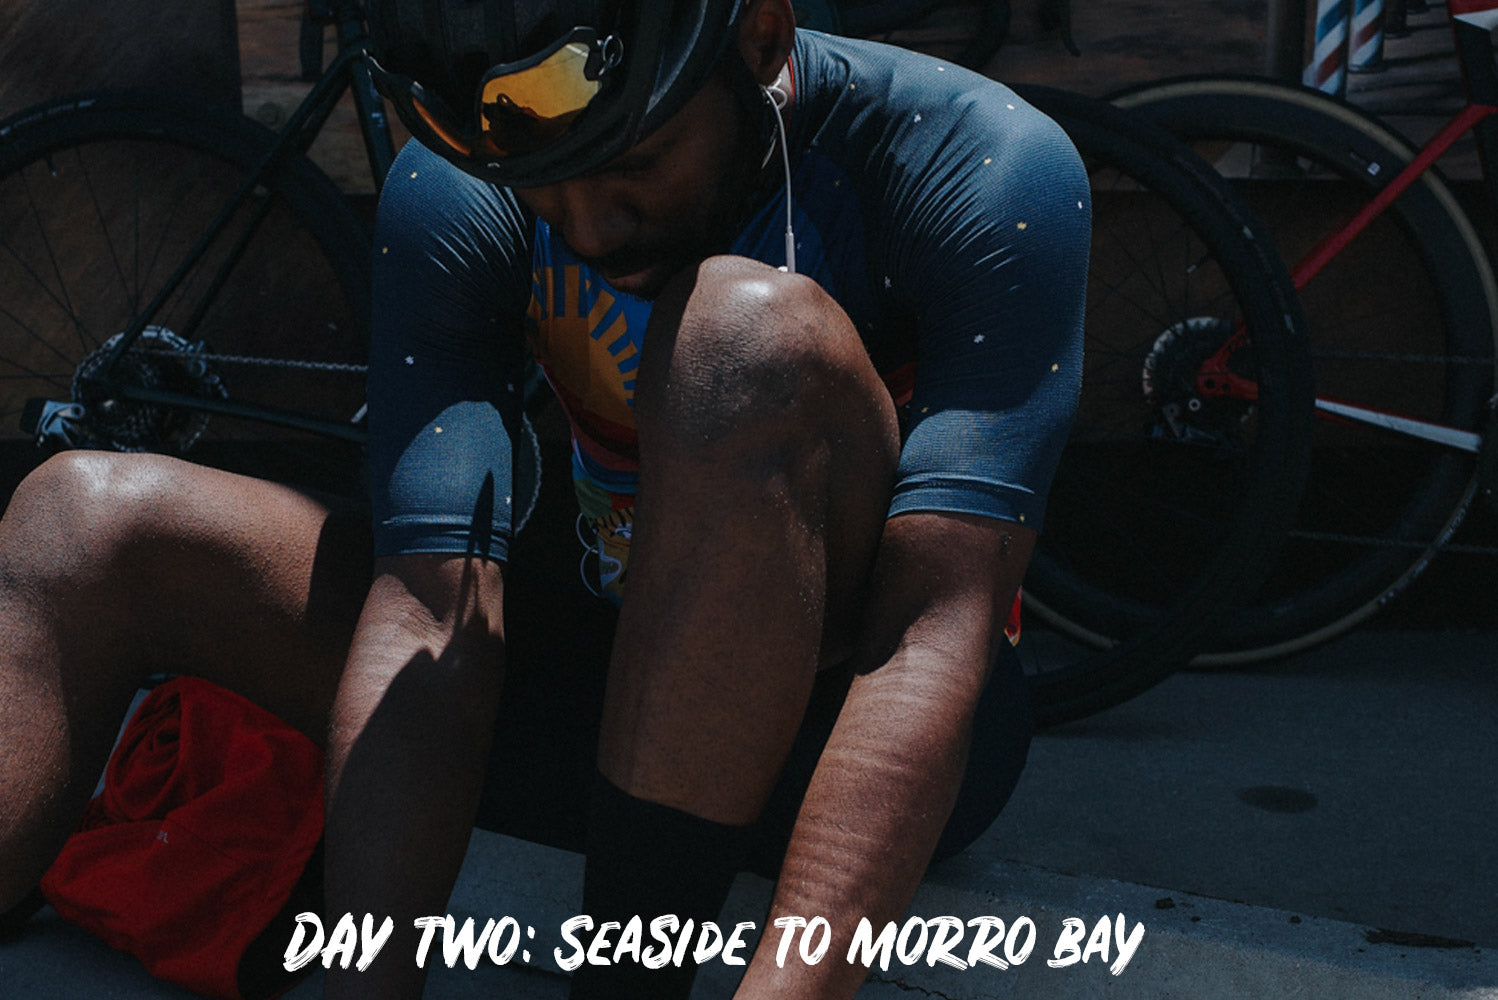 Day Two: Seaside to Morro Bay